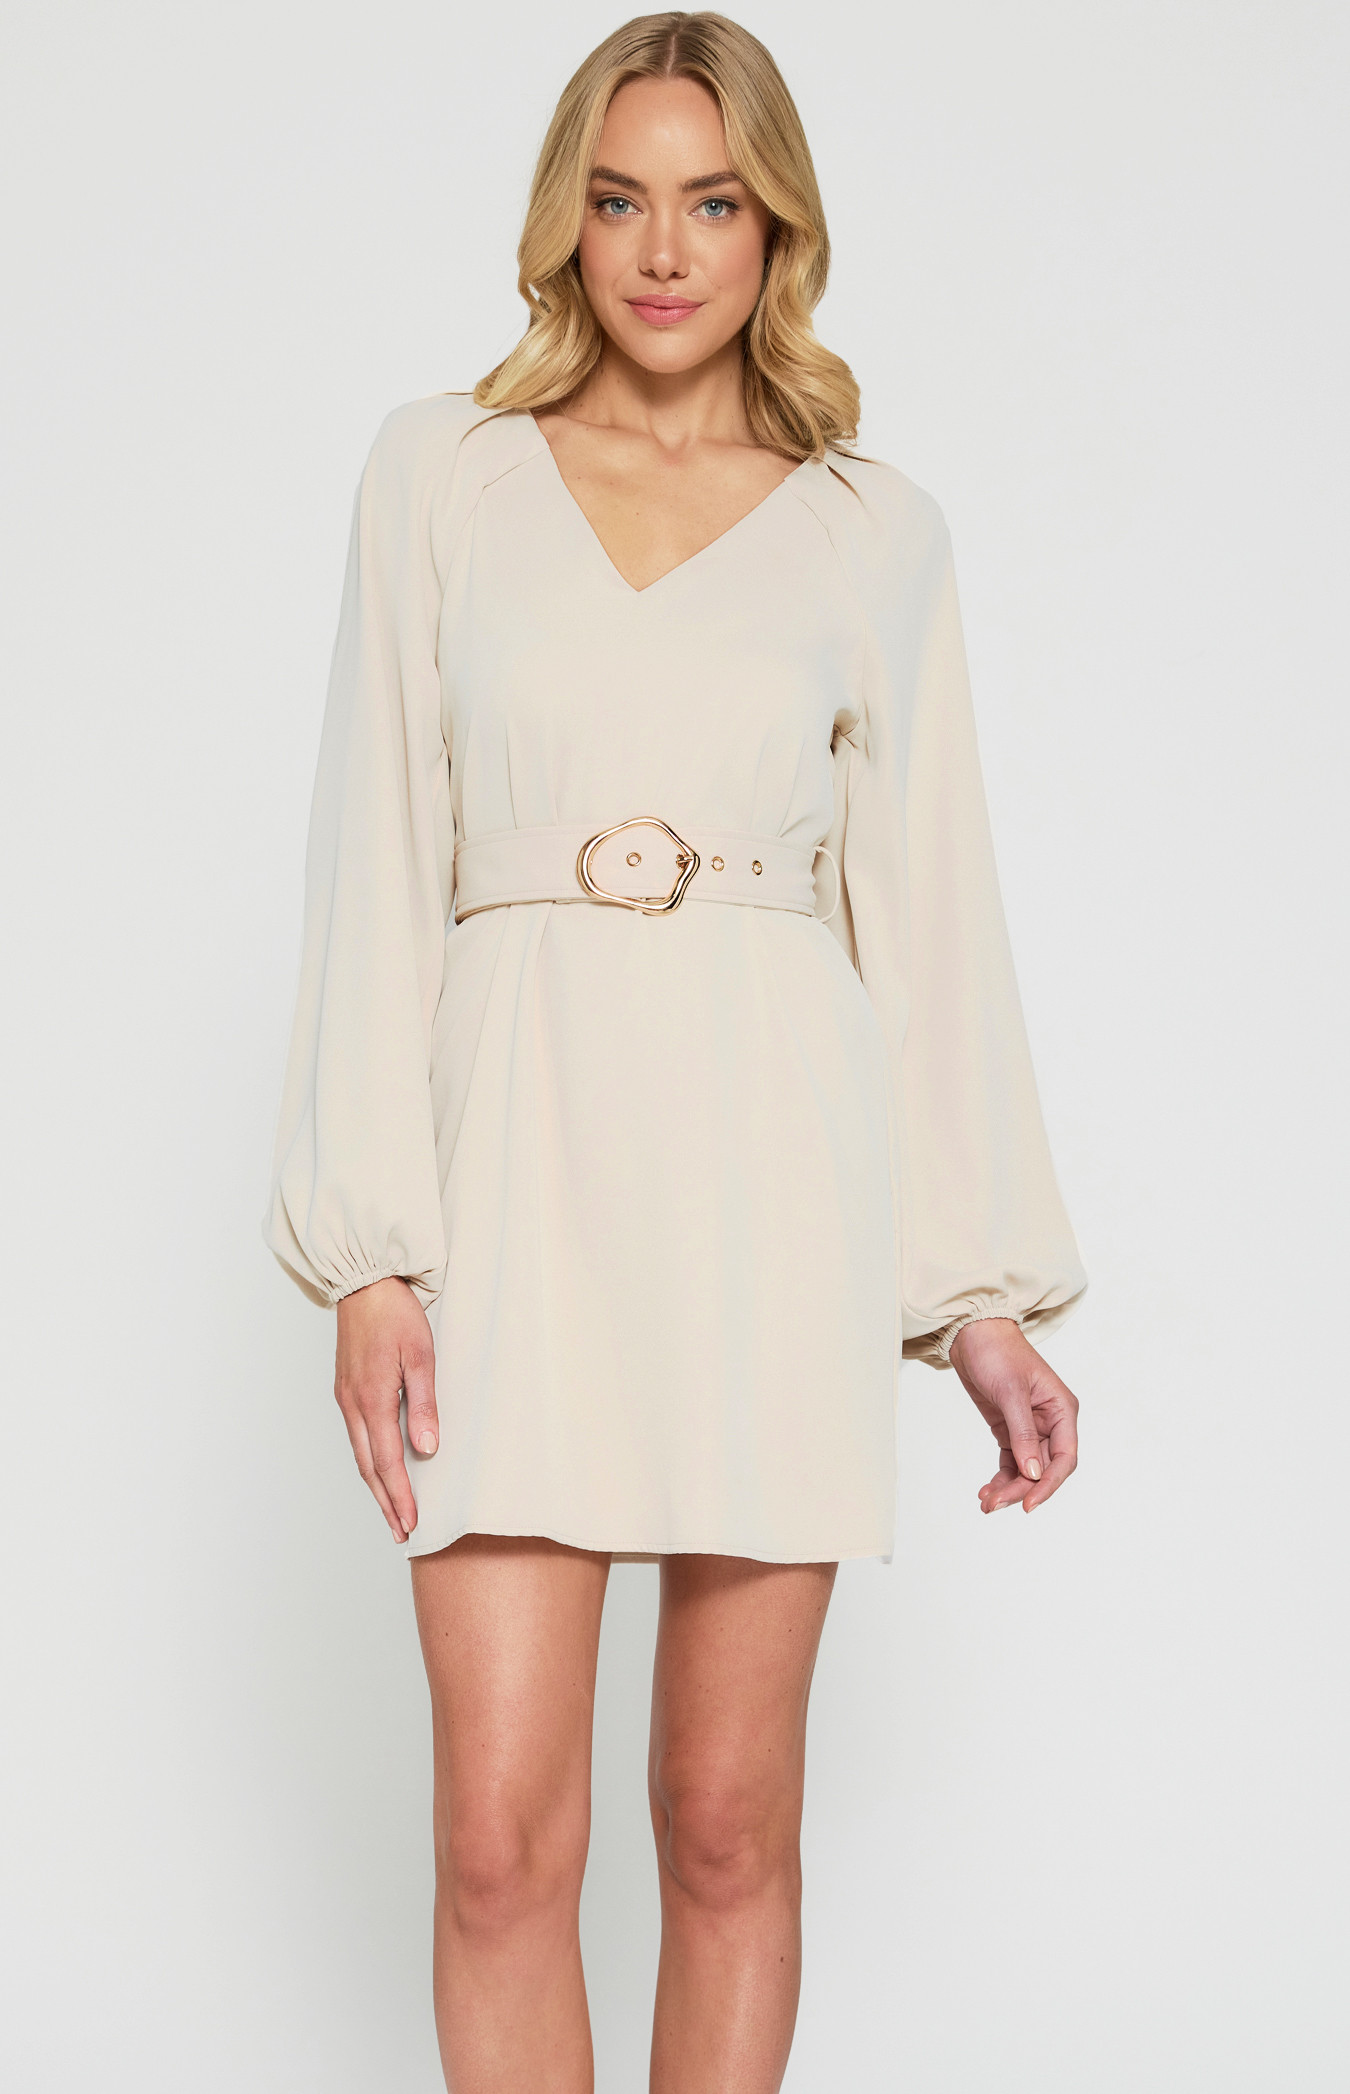 Pleated Shoulder Dress with Belt Buckle Feature (SDR1414B)